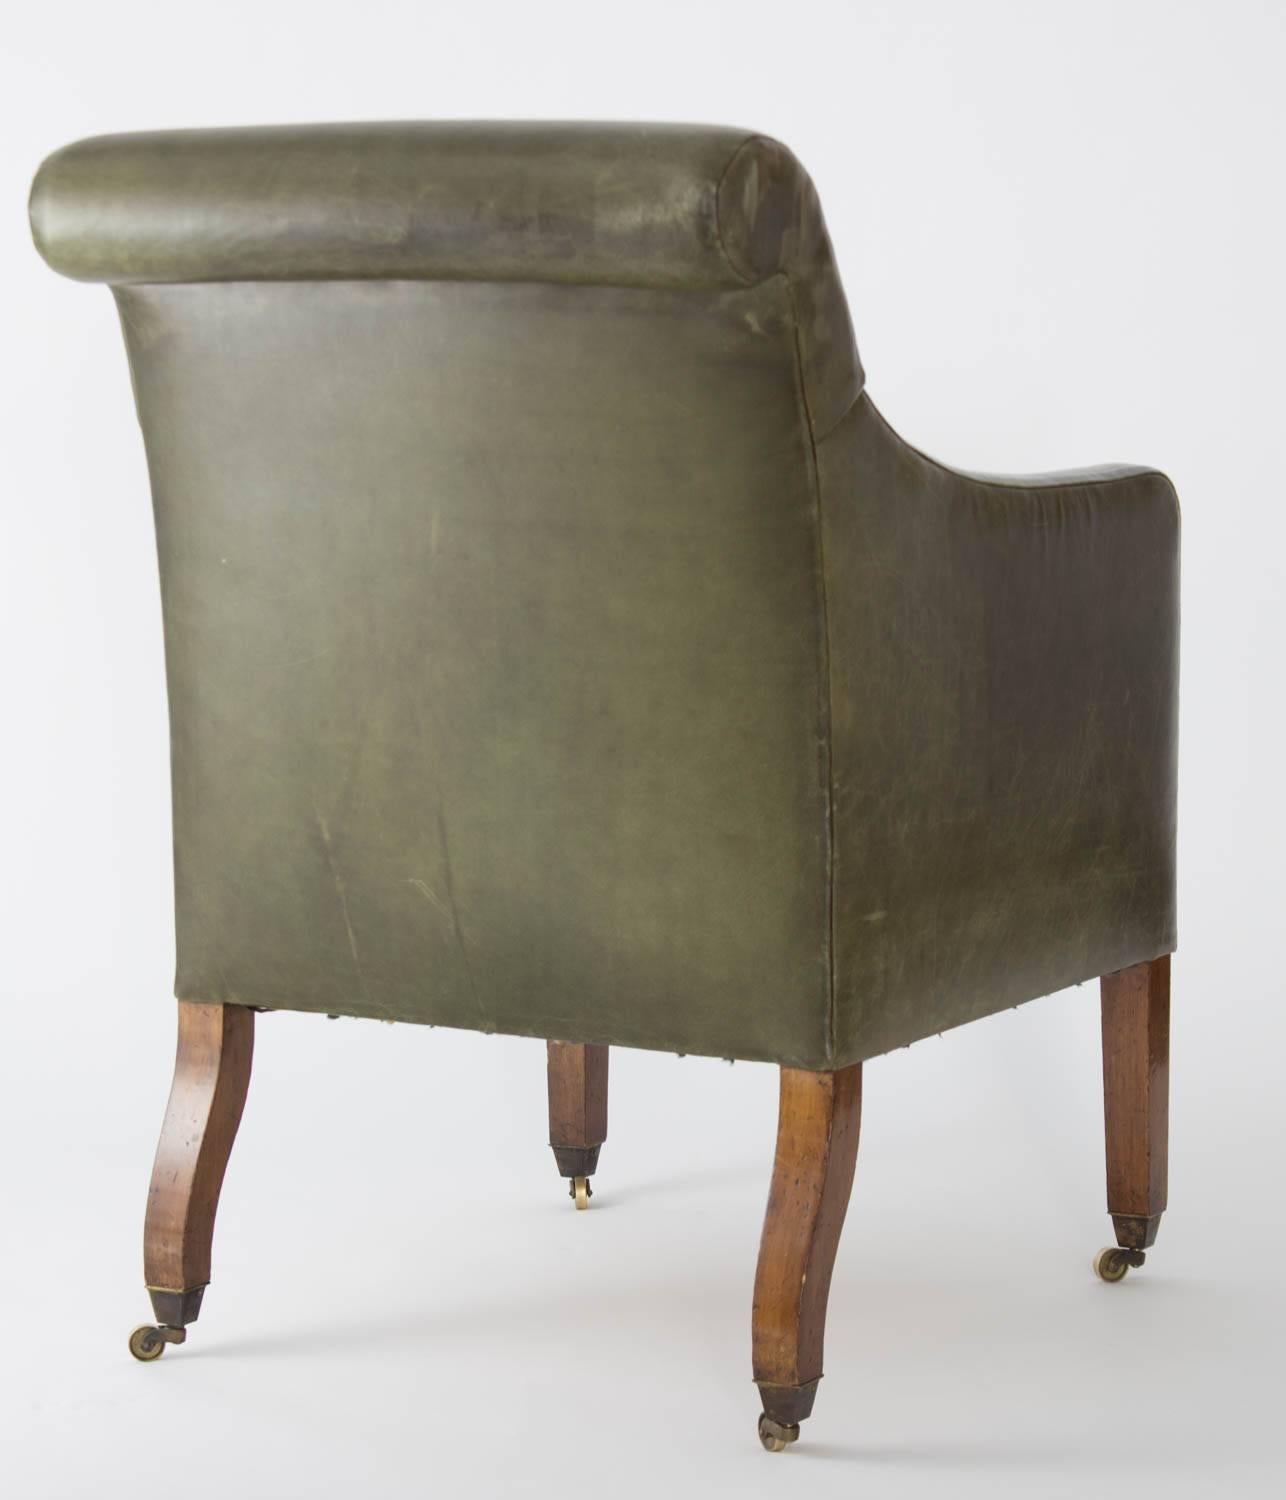 An over scrolled back, arms and loose cushioned seat covered in green leather on fluted Regency legs ending in caps and casters.

Wear consistent with age and use.

Provenance: From the collection of Michael S Smith collection.